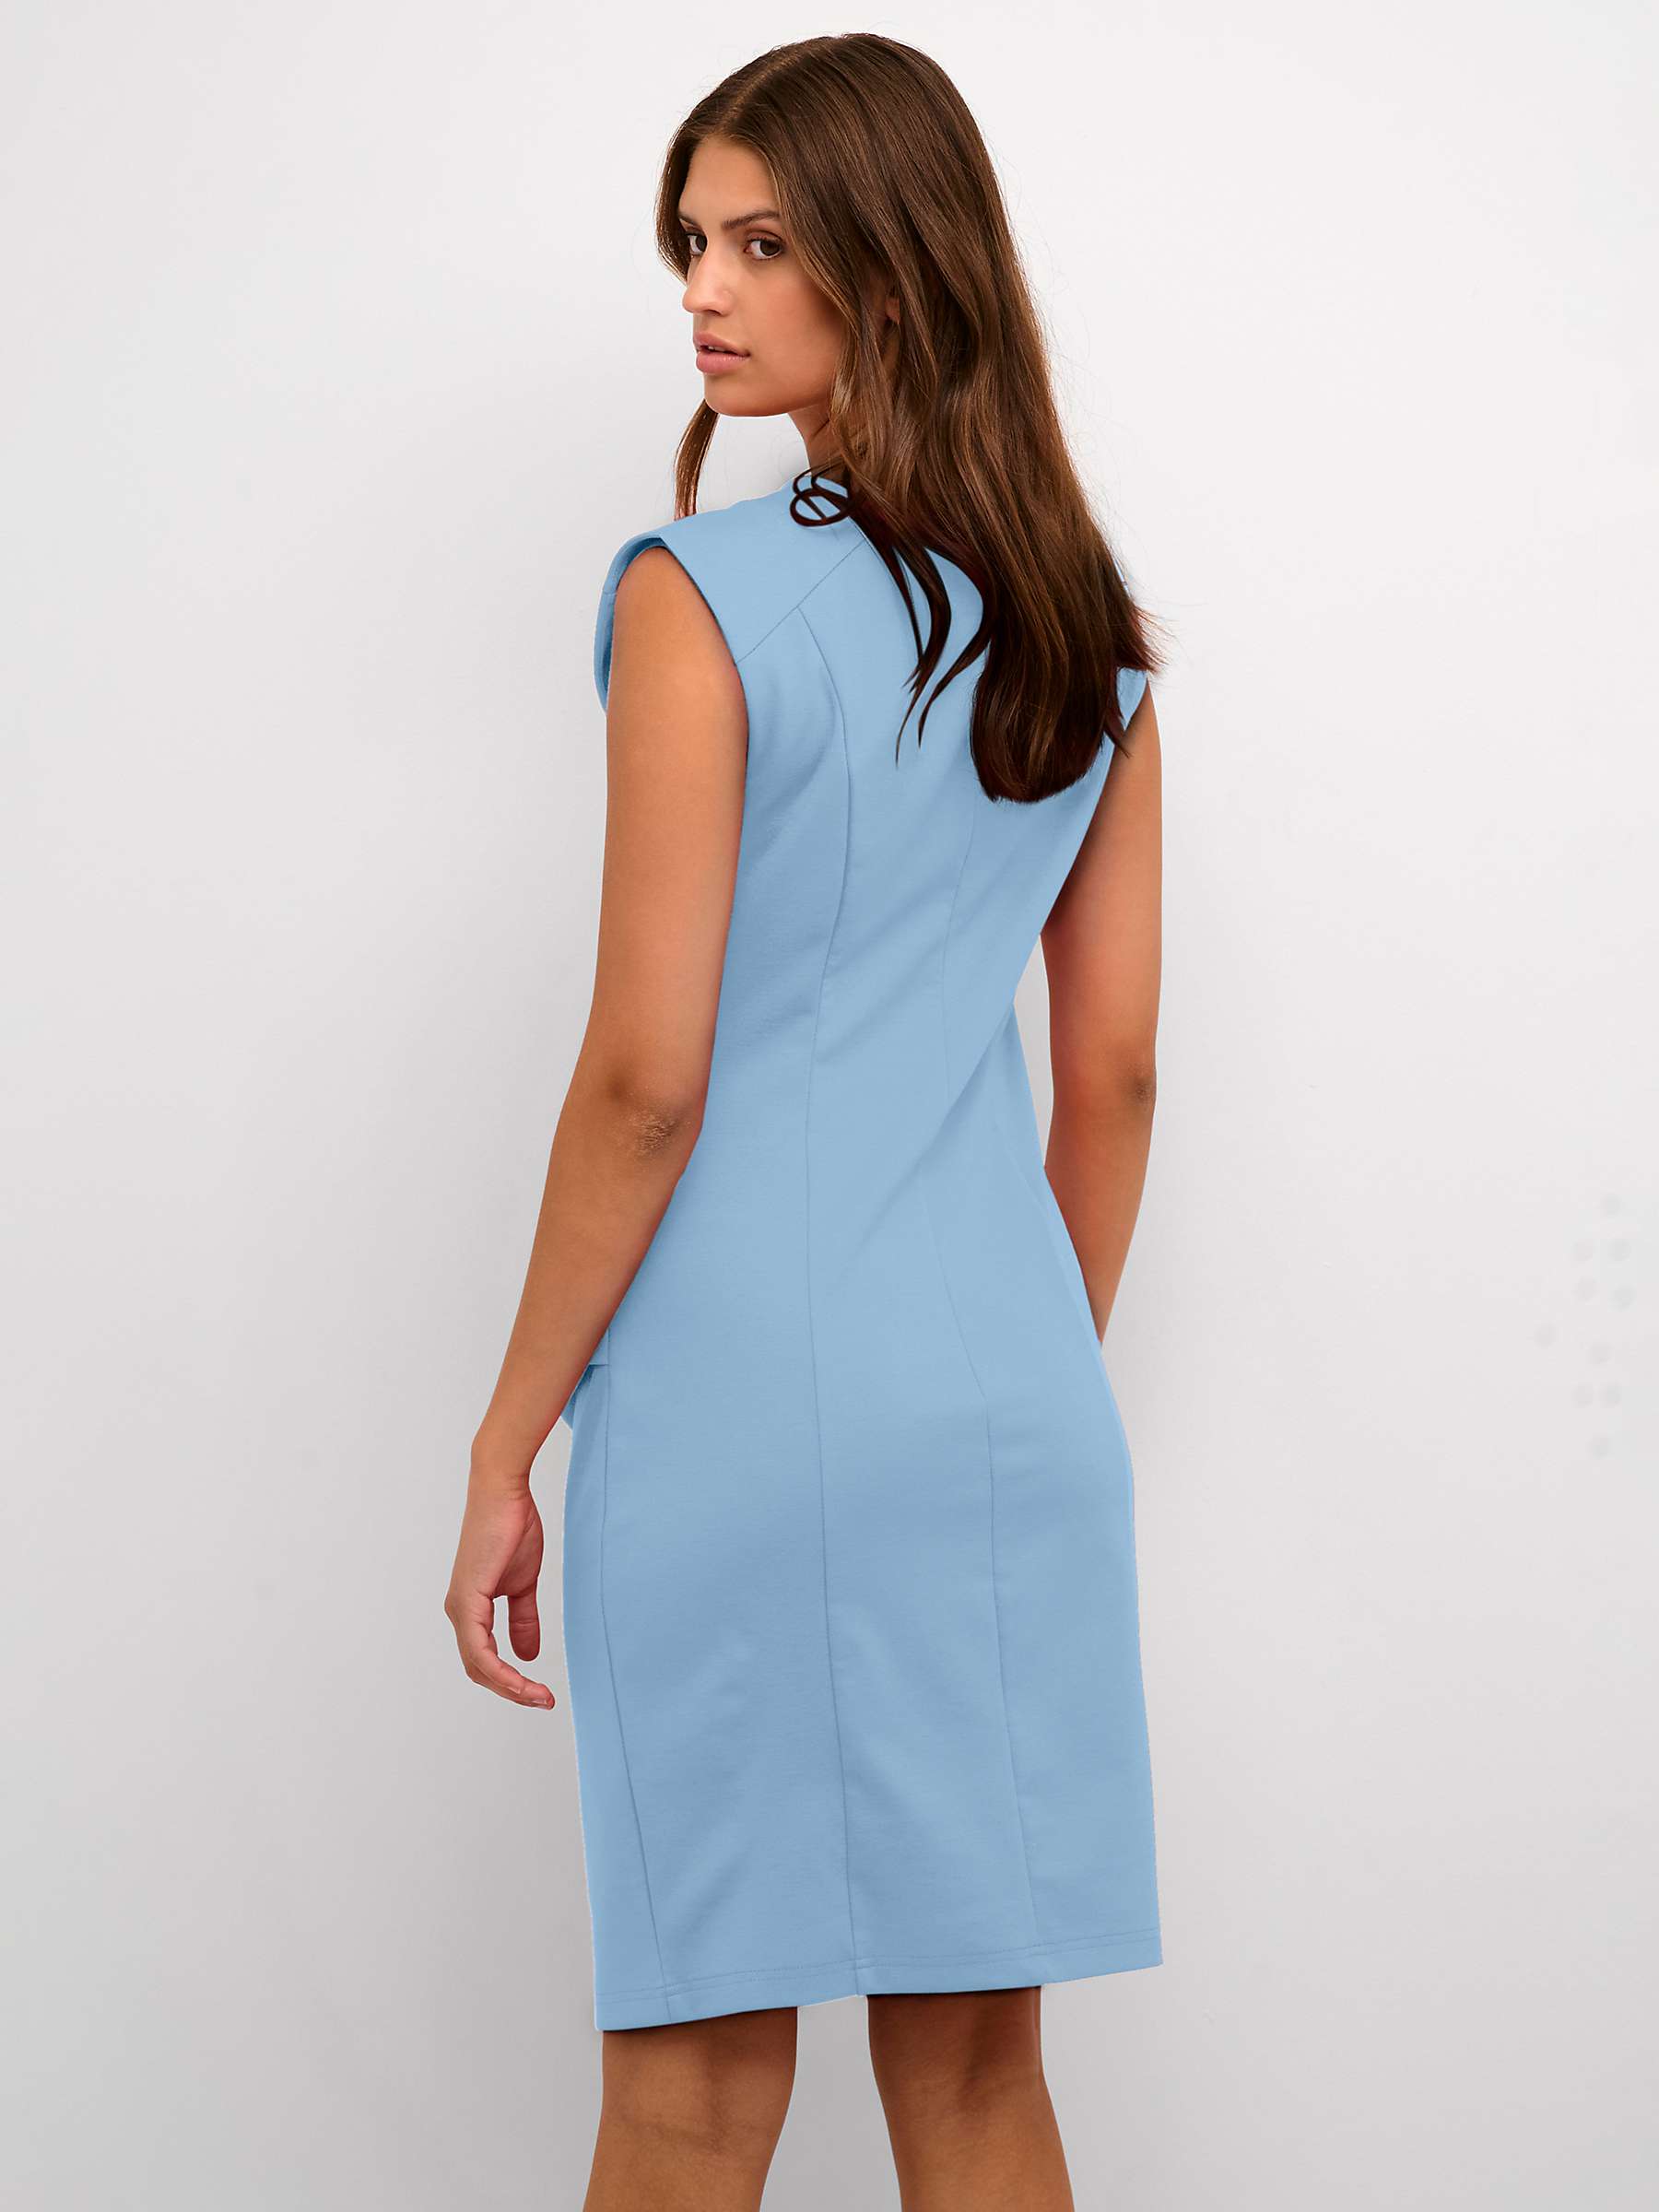 Buy KAFFE India Sleeveless Fitted Cocktail Dress, Faded Denim Online at johnlewis.com